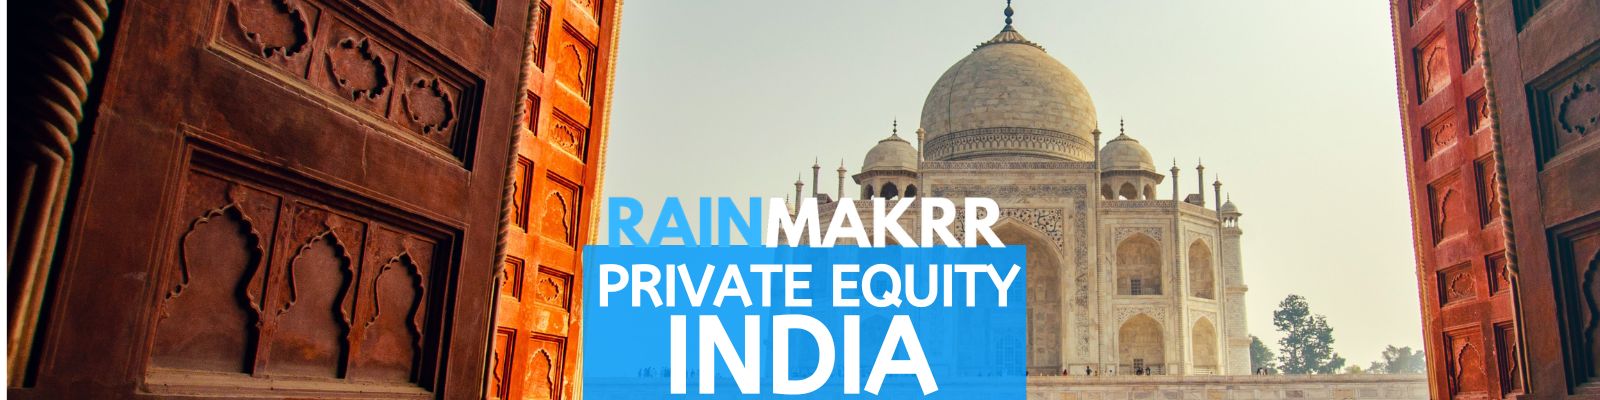 Private Equity News Top India Private Equity Firms India